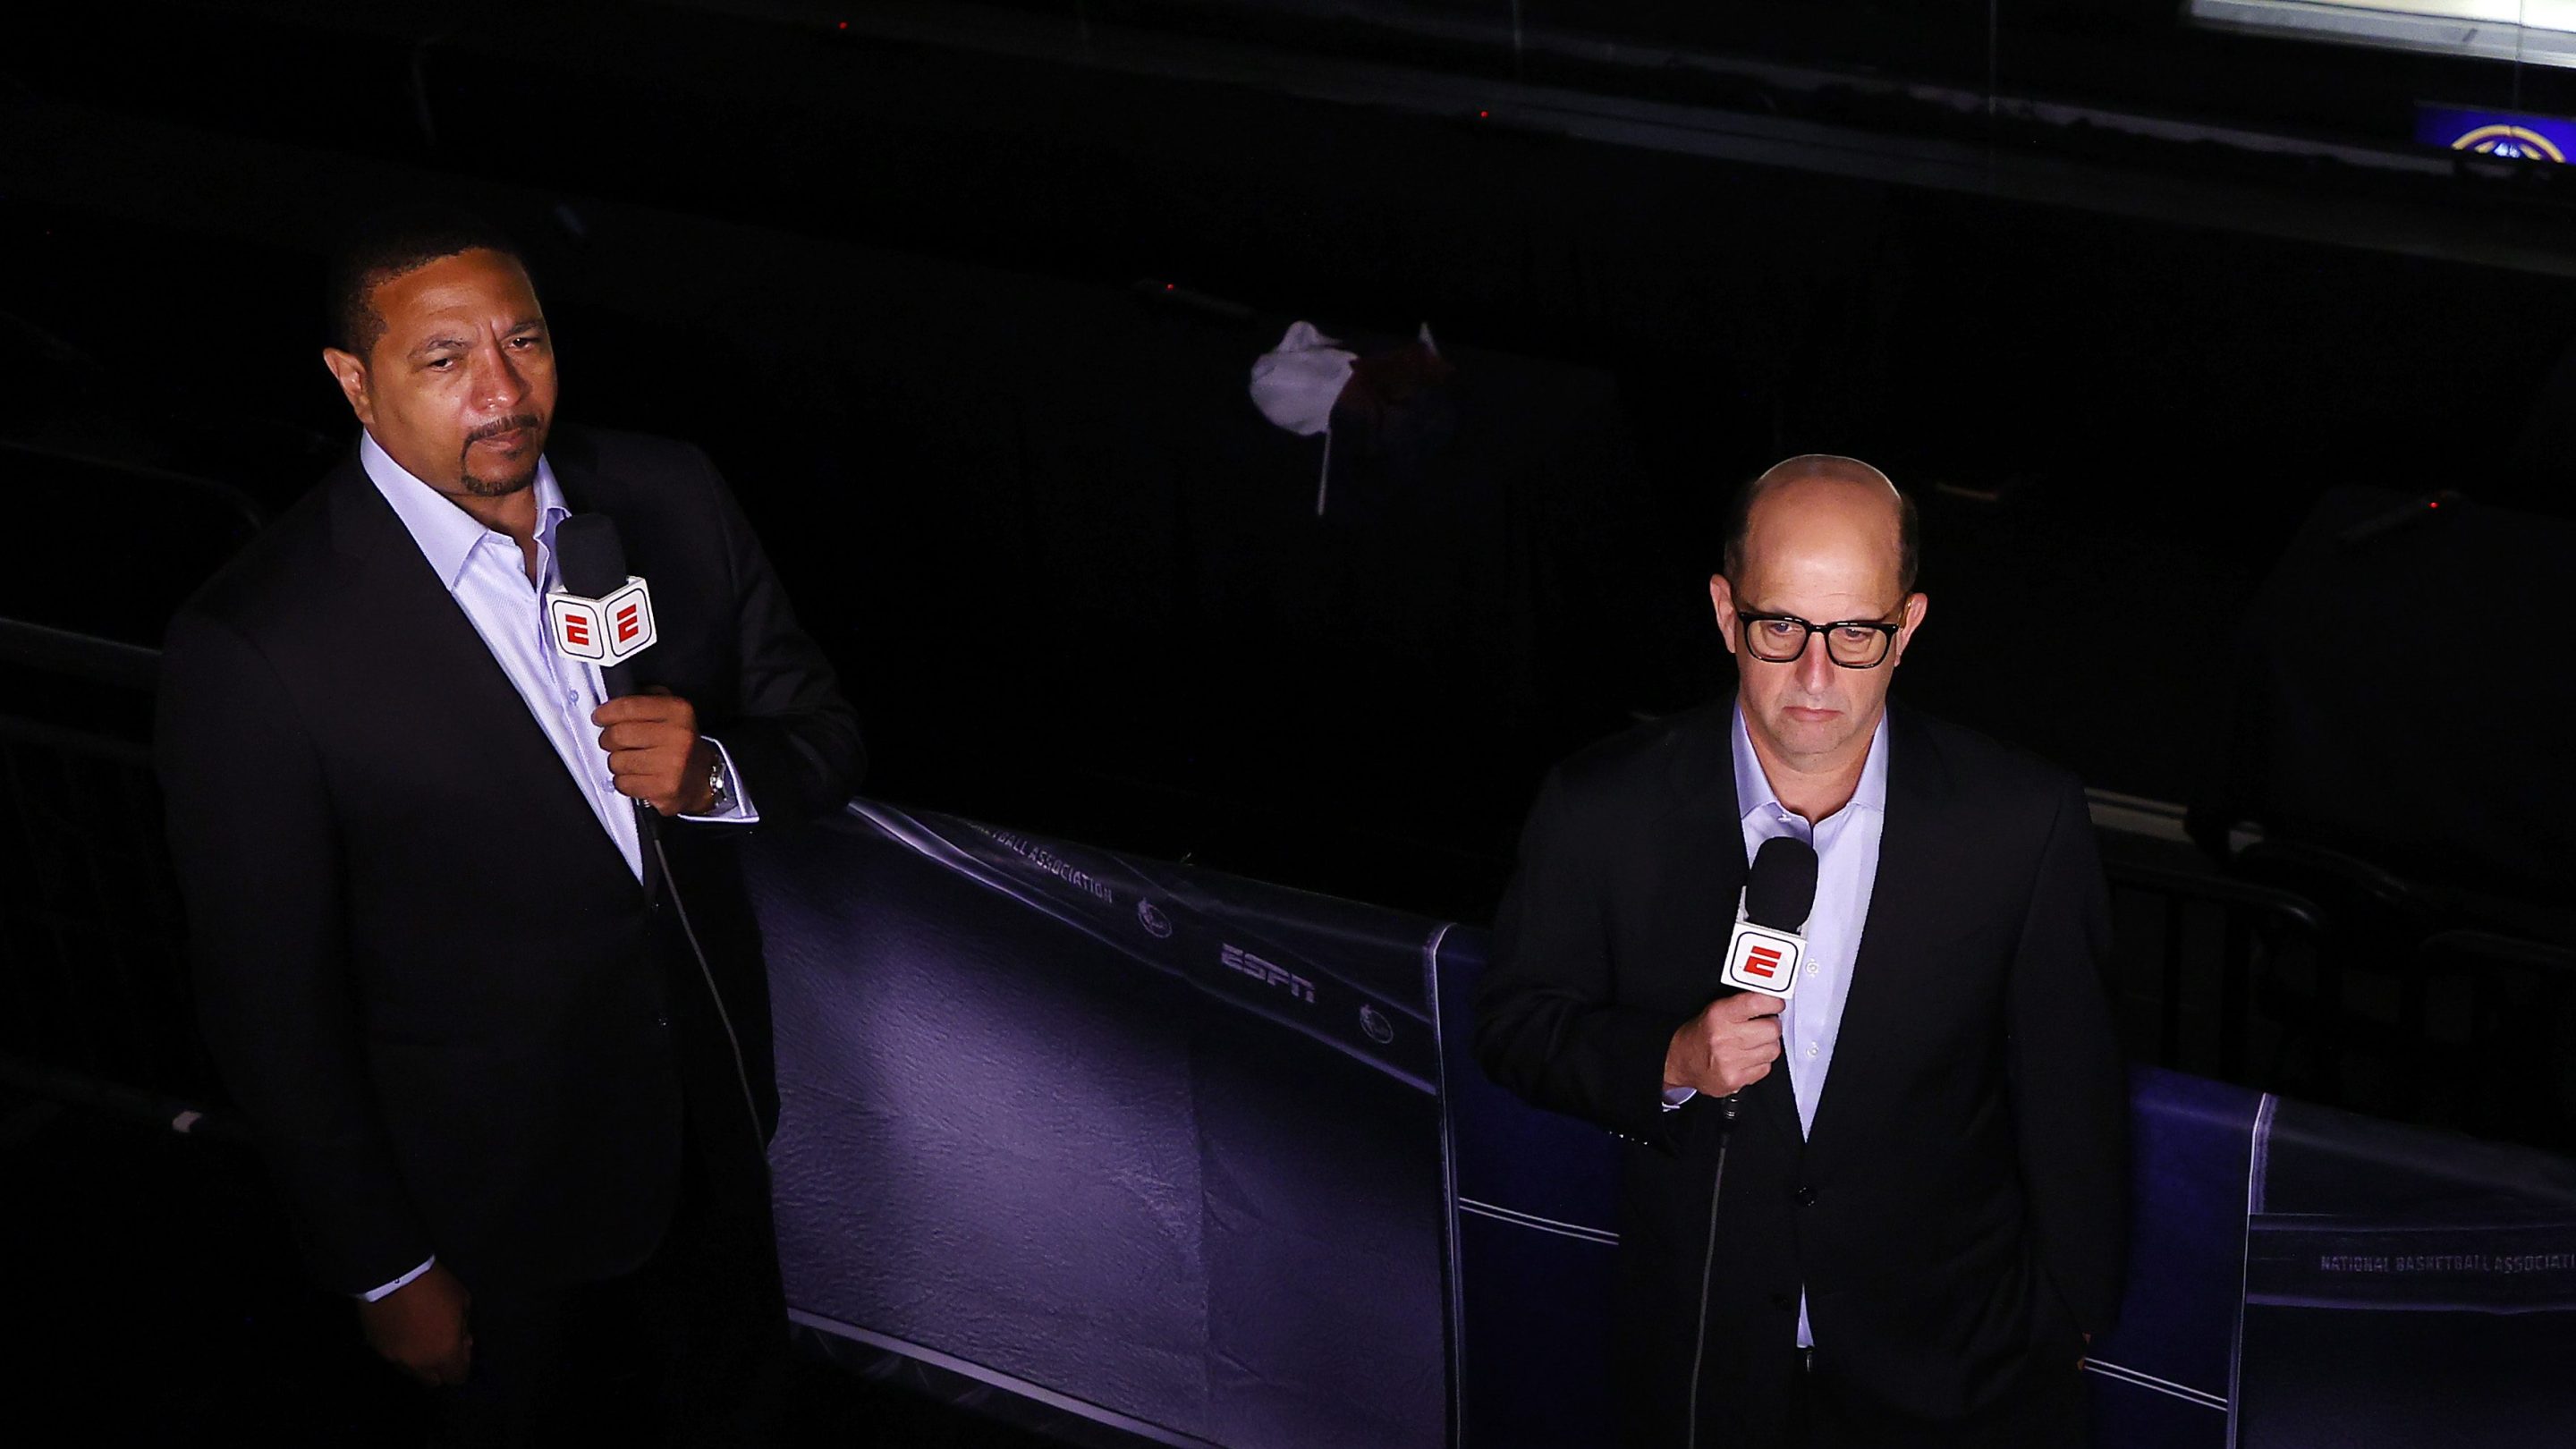 Mark Jackson and Jeff Van Gundy work the ESPN broadcast of an NBA playoff game in the Orlando bubble.